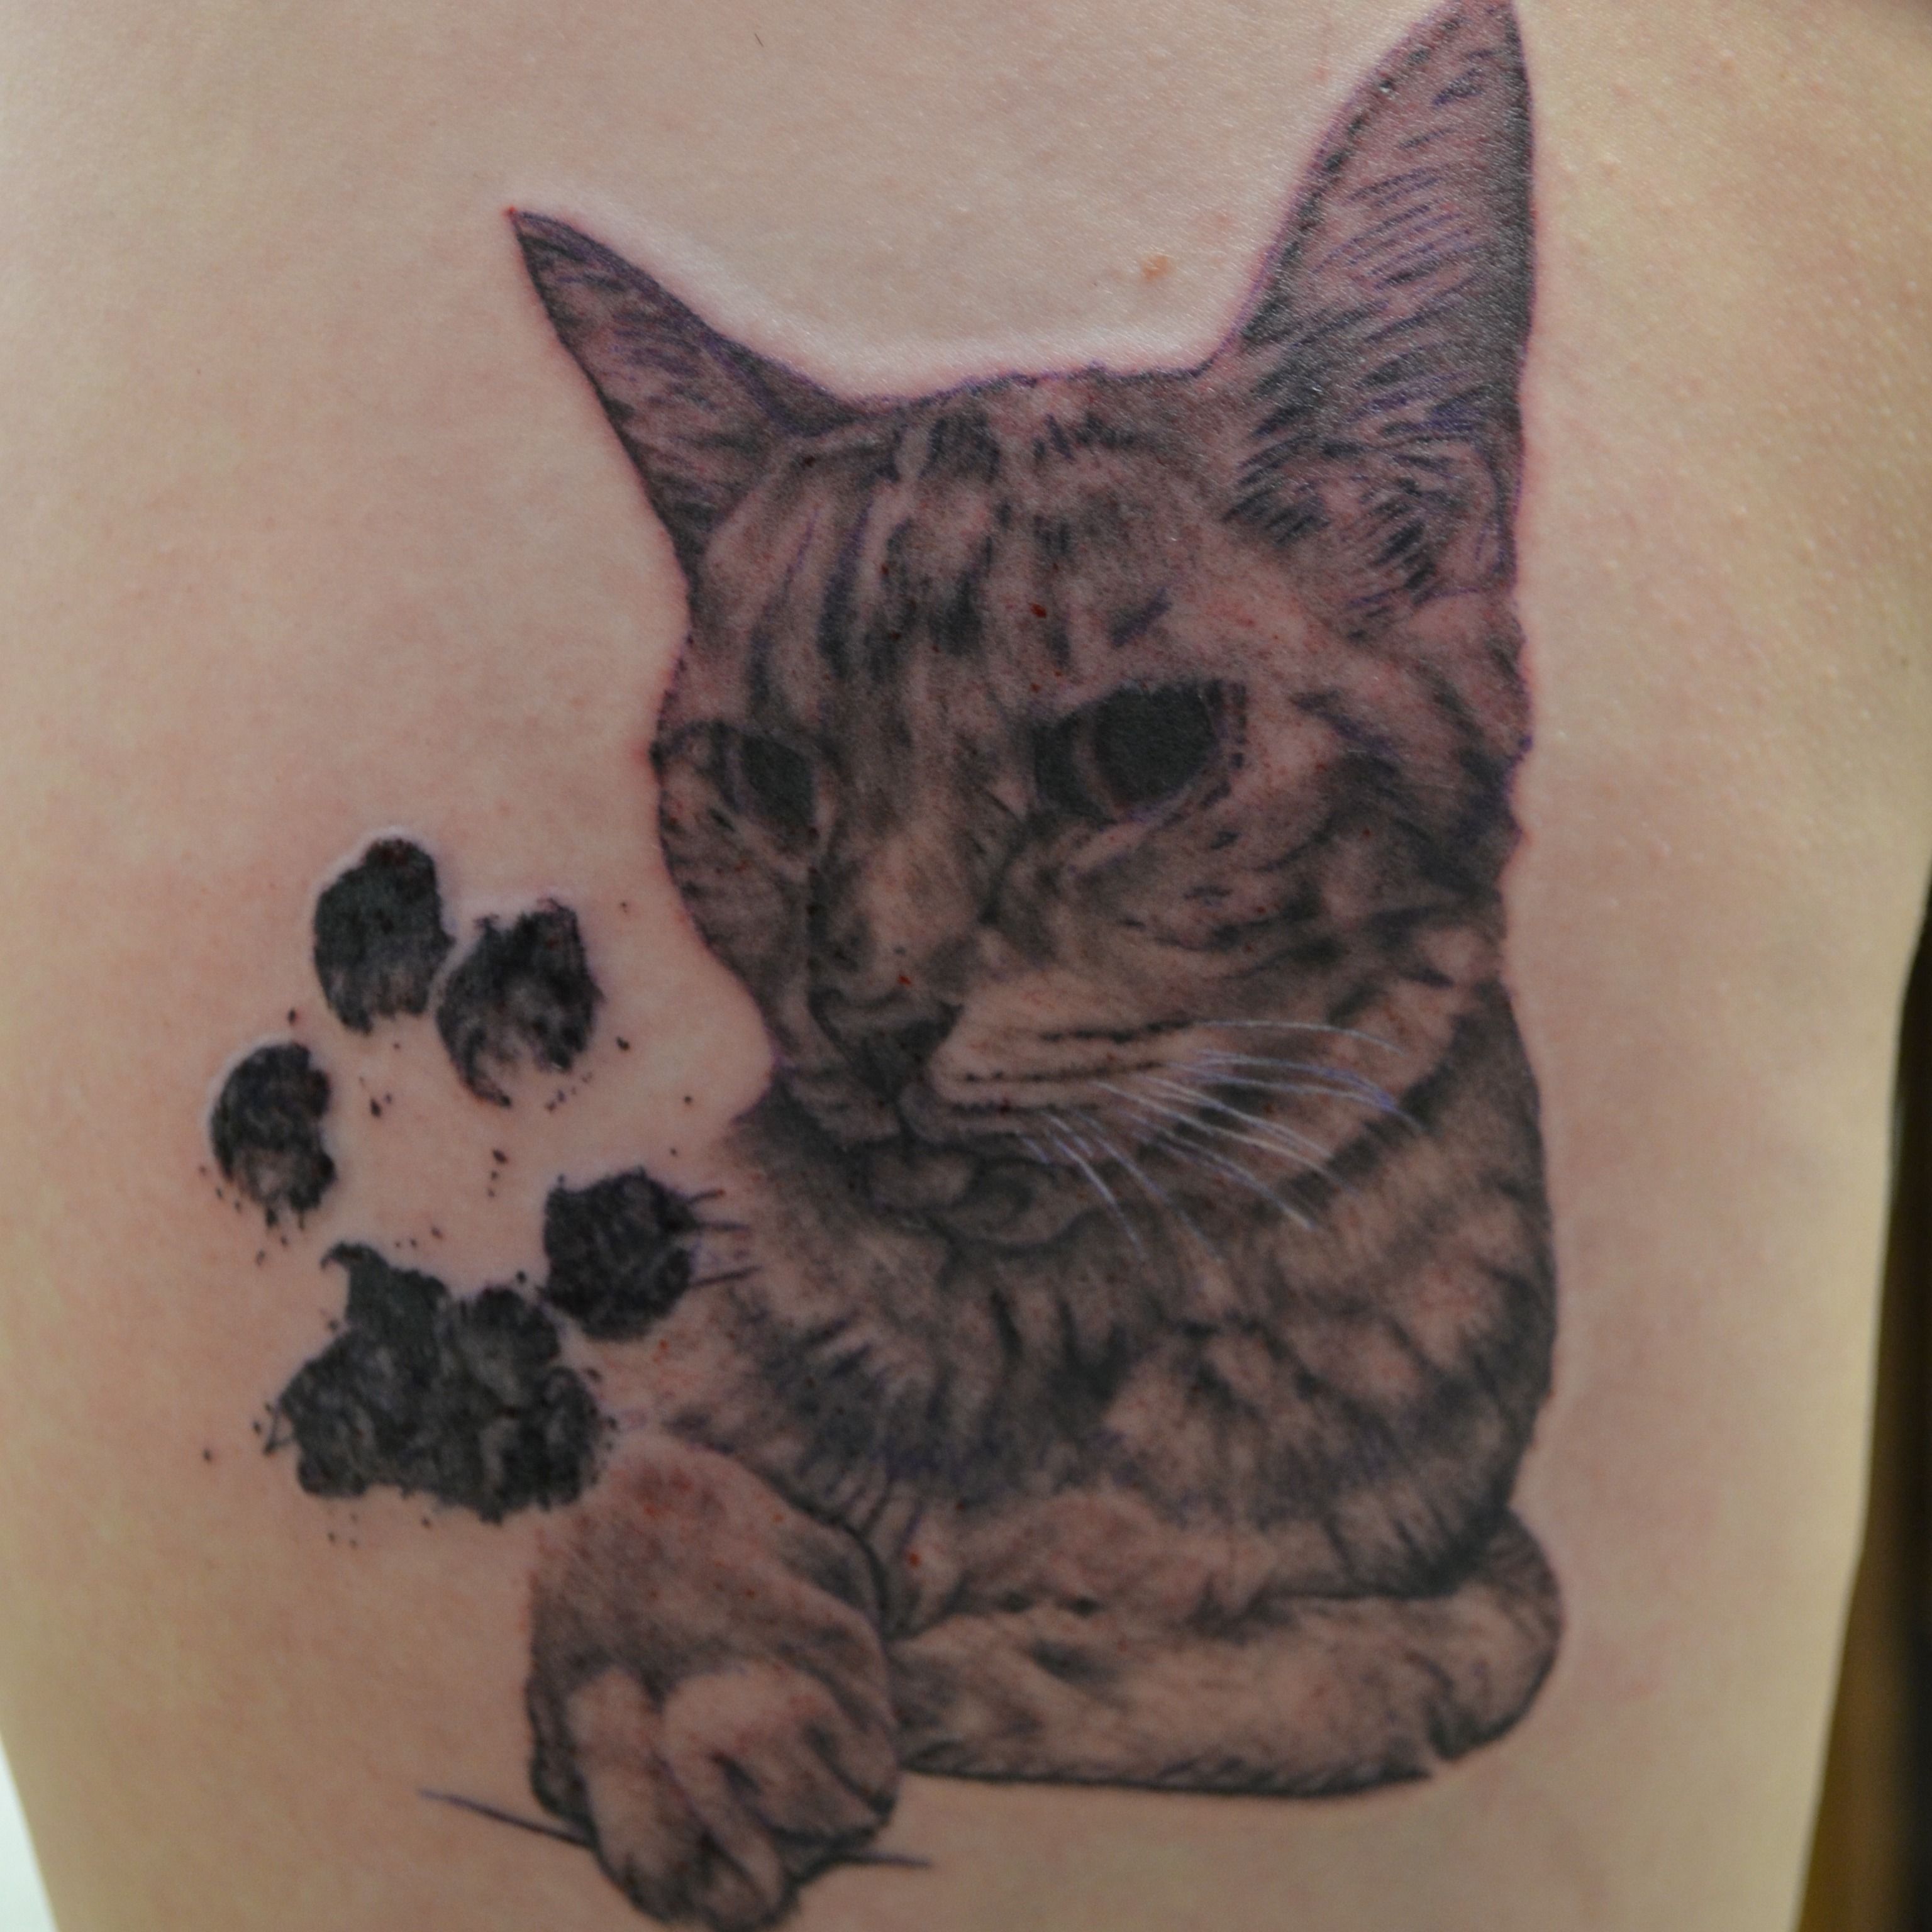 Tattoo uploaded by nickweavertattoos  Water color cat paw prints   Tattoodo